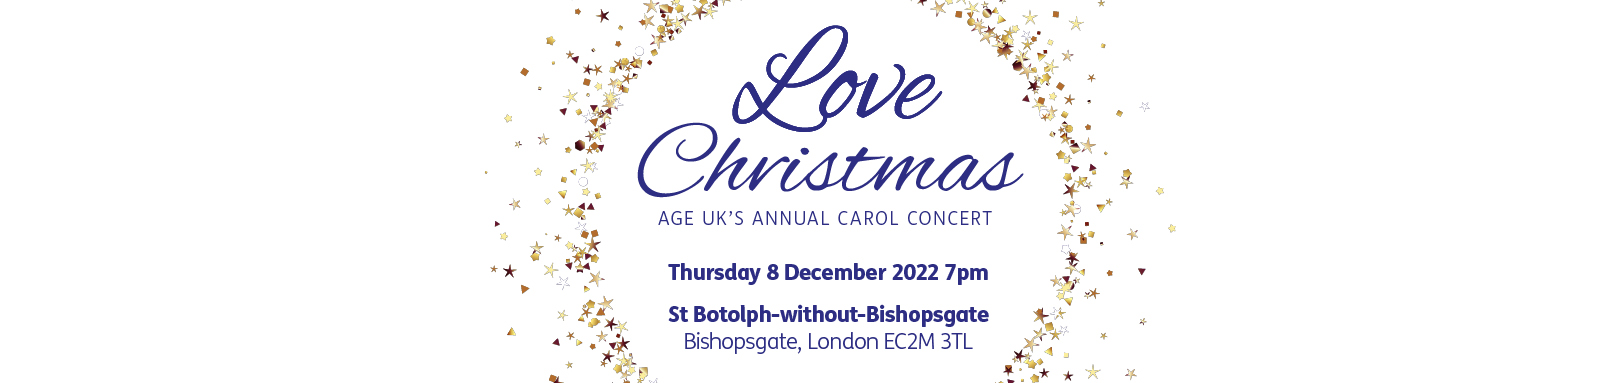 White banner with gold stars and the words Love Christmas - Age UK's annual carol concert written in gold